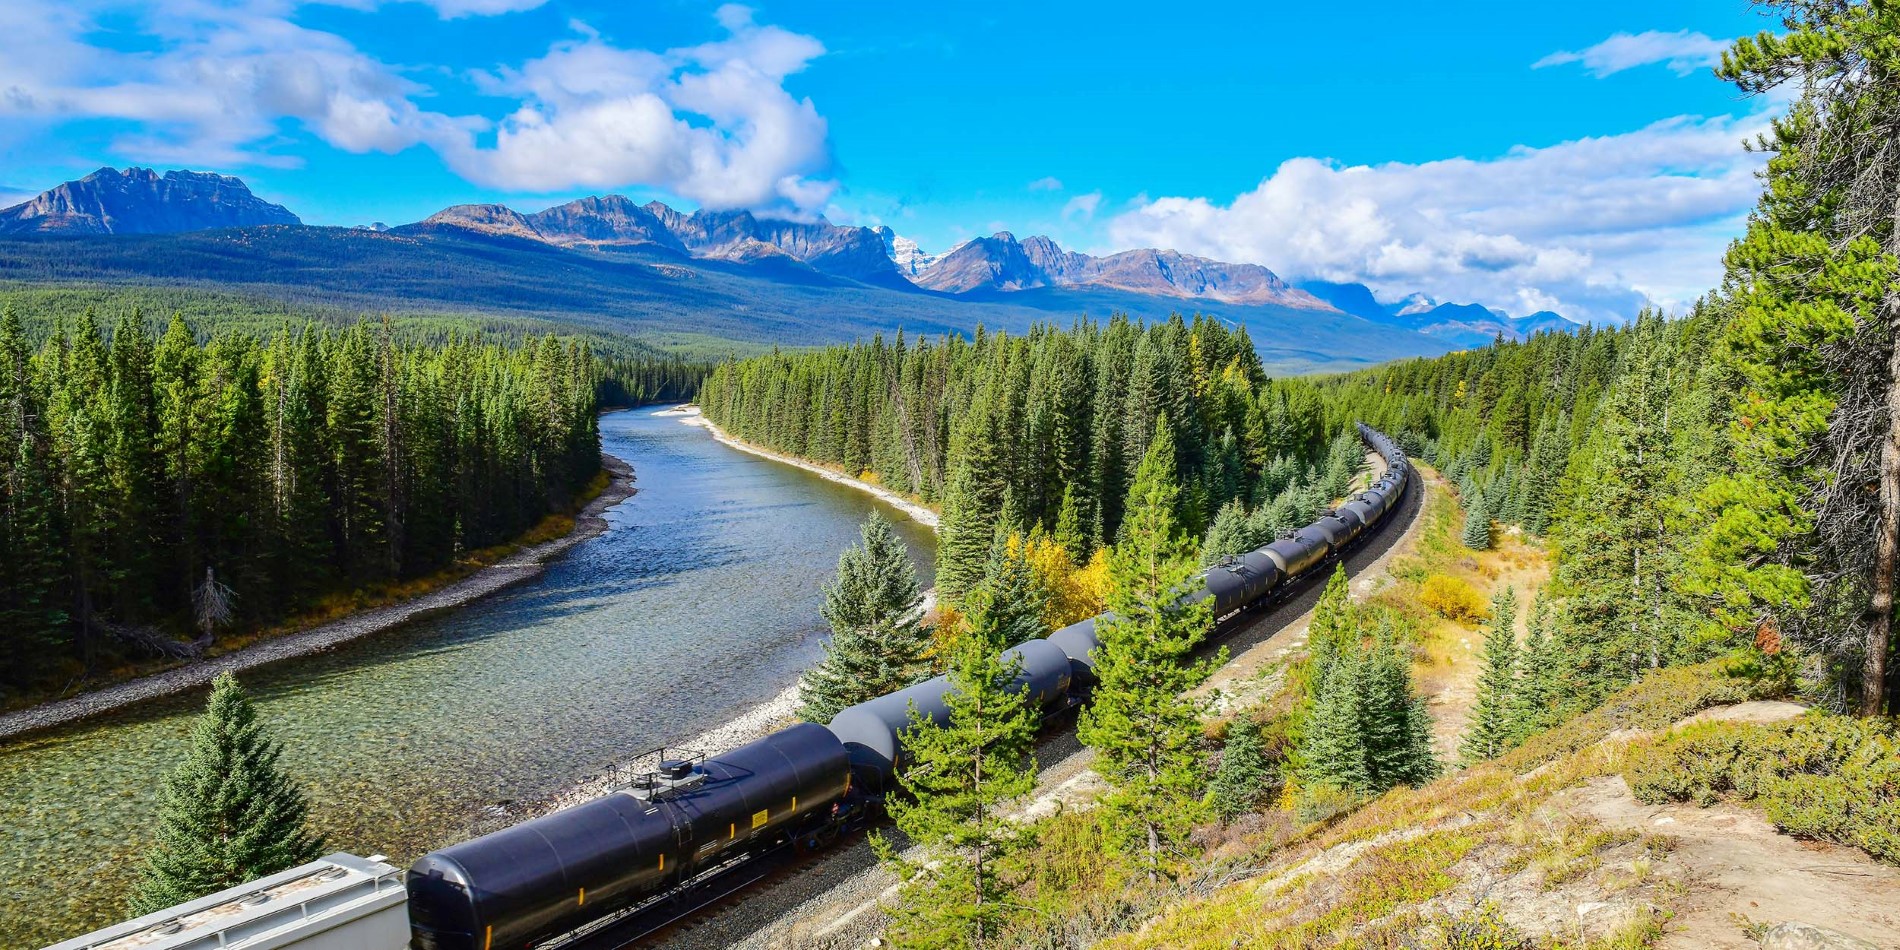 Take a scenic journey on the Rocky Mountaineer train.